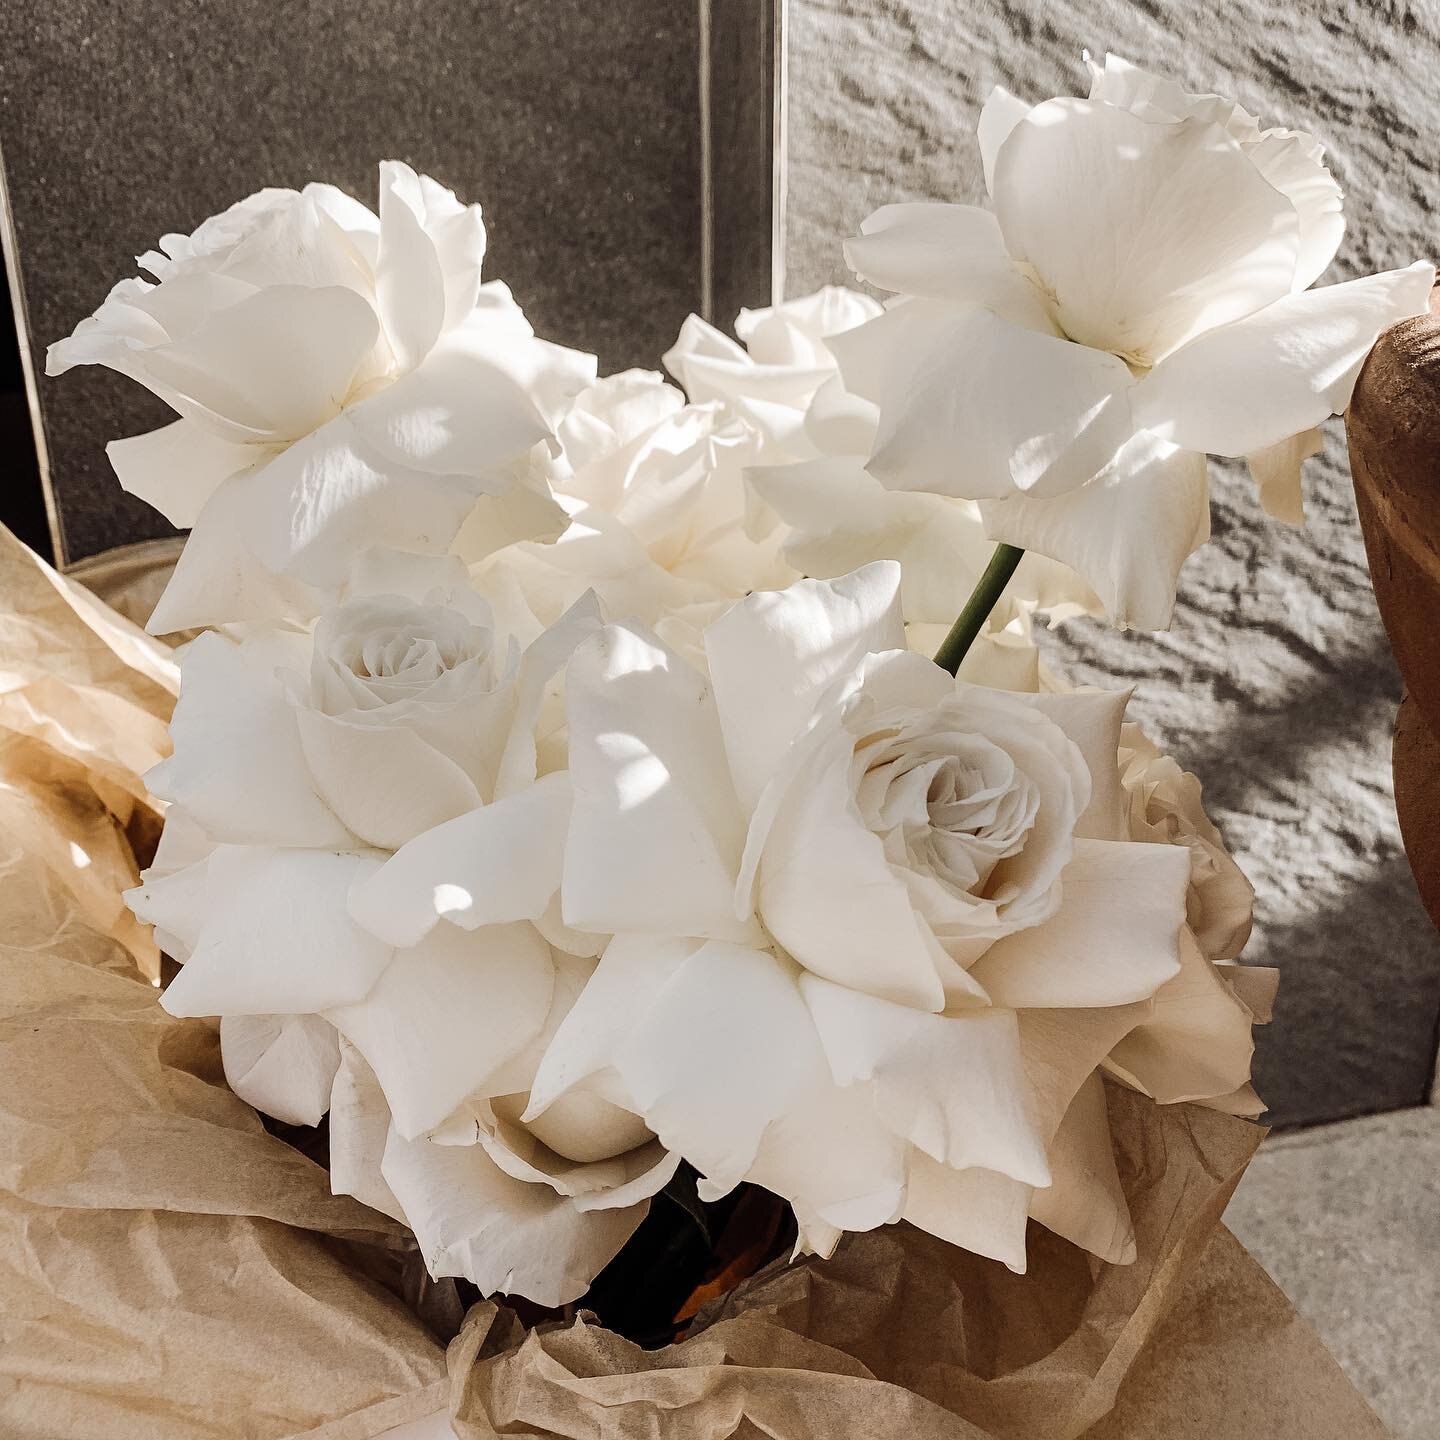 Simplicity✨

White roses for S+S, &amp; white on white textural styling for their London reception. 

Styling &amp; Hire @thecollectcocreative 
Bouquet @floandthefoxglove 

#thecollectcocreative